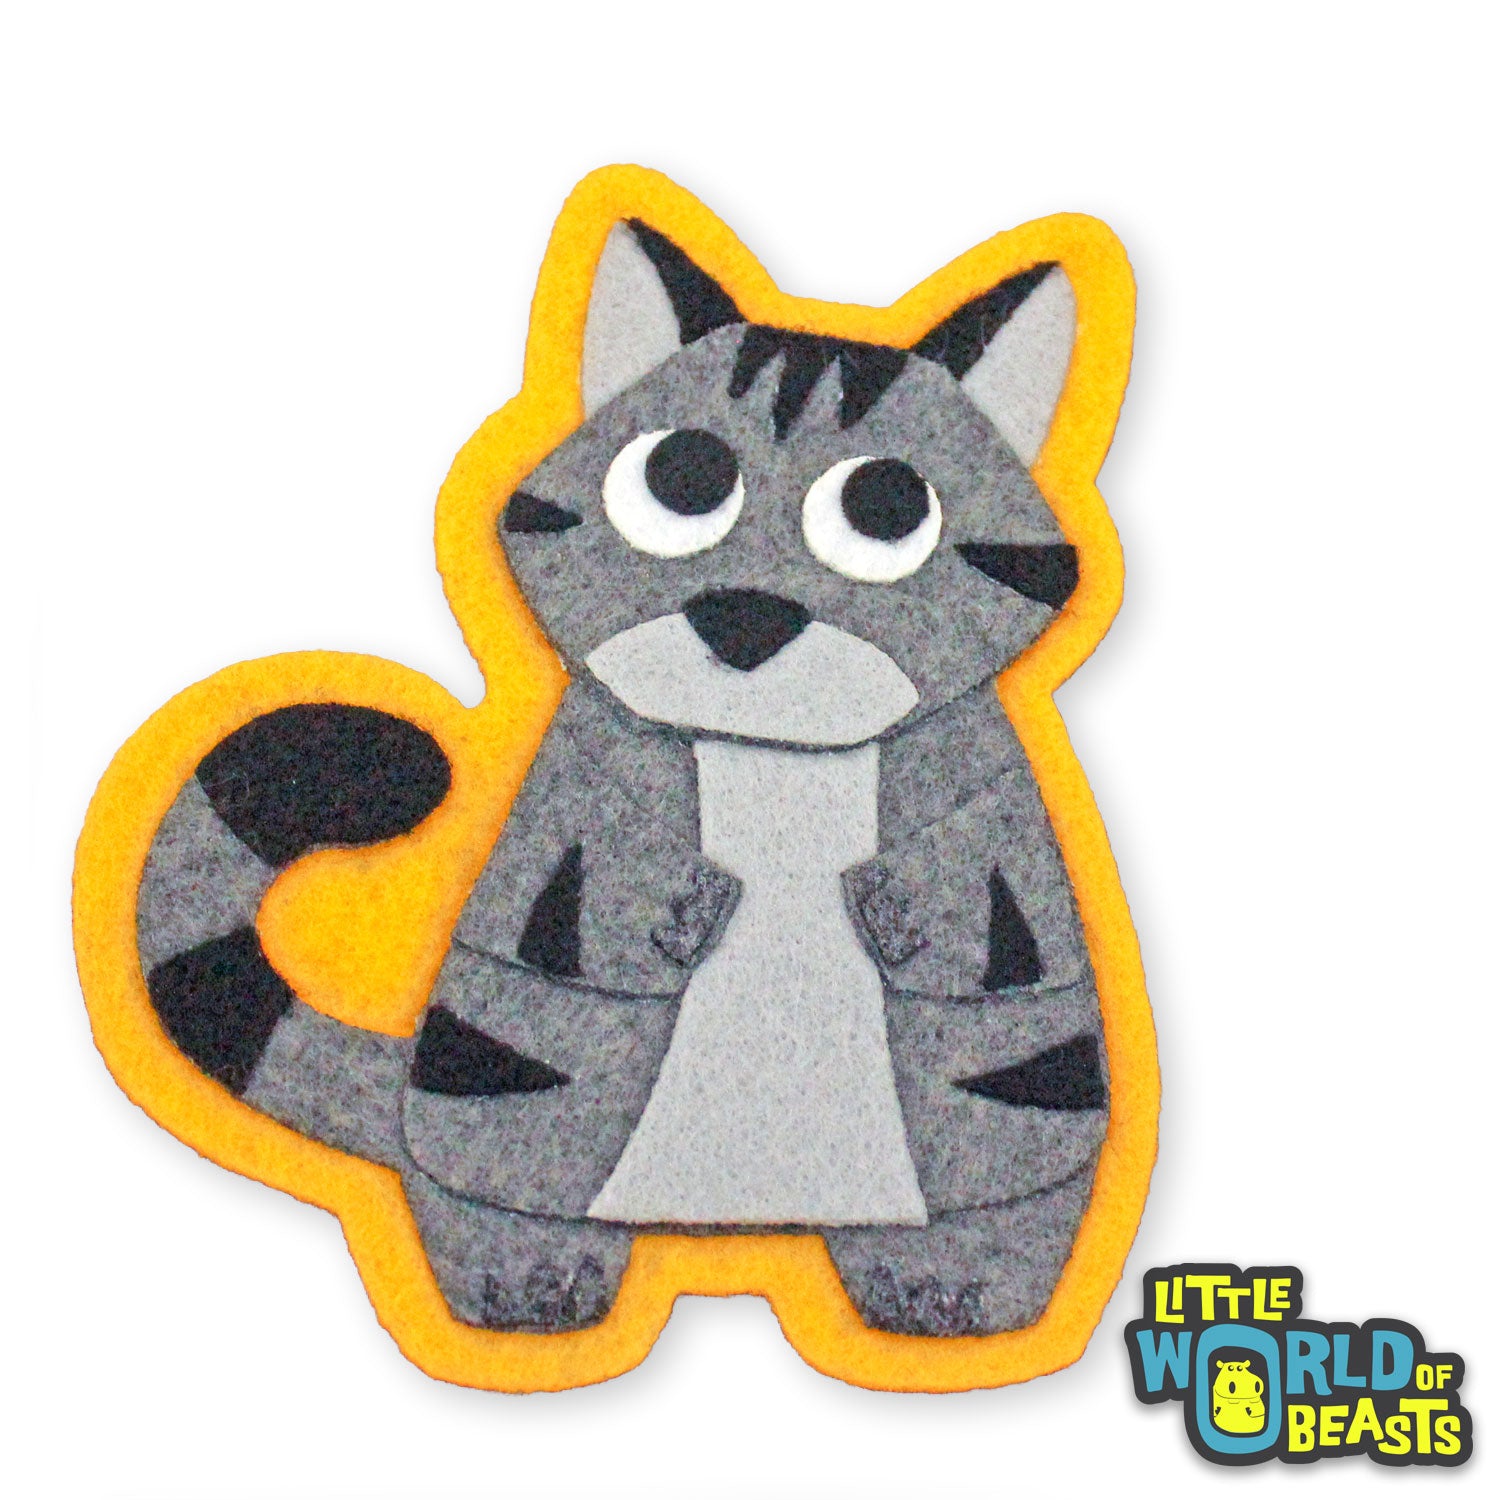 Hazel the Gray Tabby - Felt Cat Patch - Sew on or Iron on - Little World of Beasts